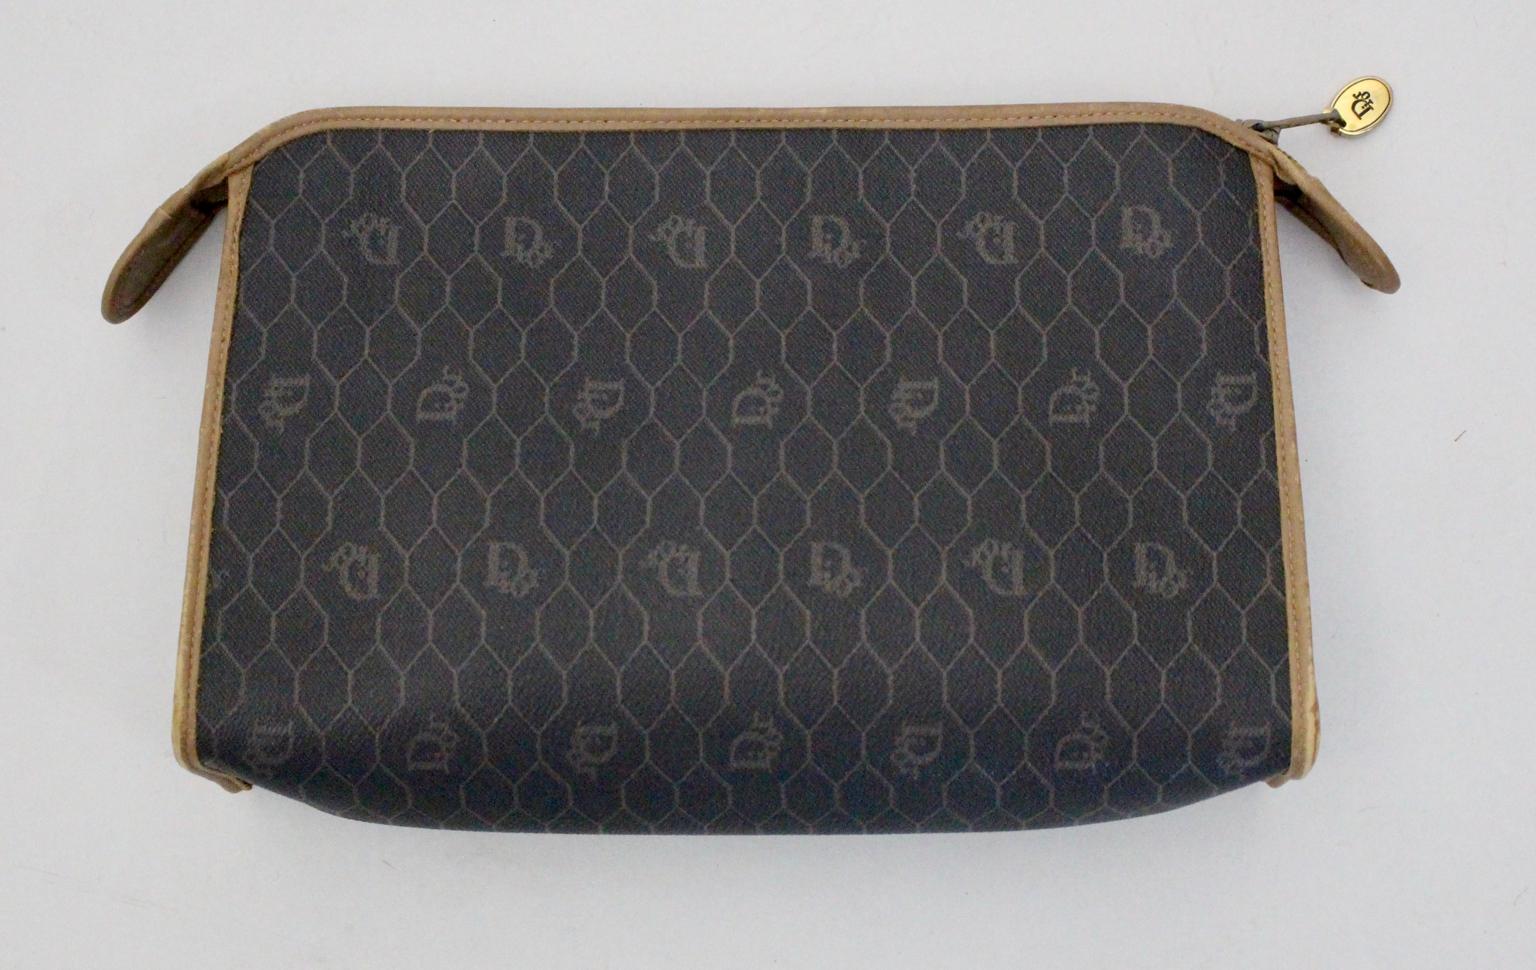 The presented clutch or handbag by Christian Dior shows the popular honeycomb pattern. The lining is made of brown canvas.
The leather frame features some minor abrasions. A great preowned vintage piece in very good condition, which is about 20